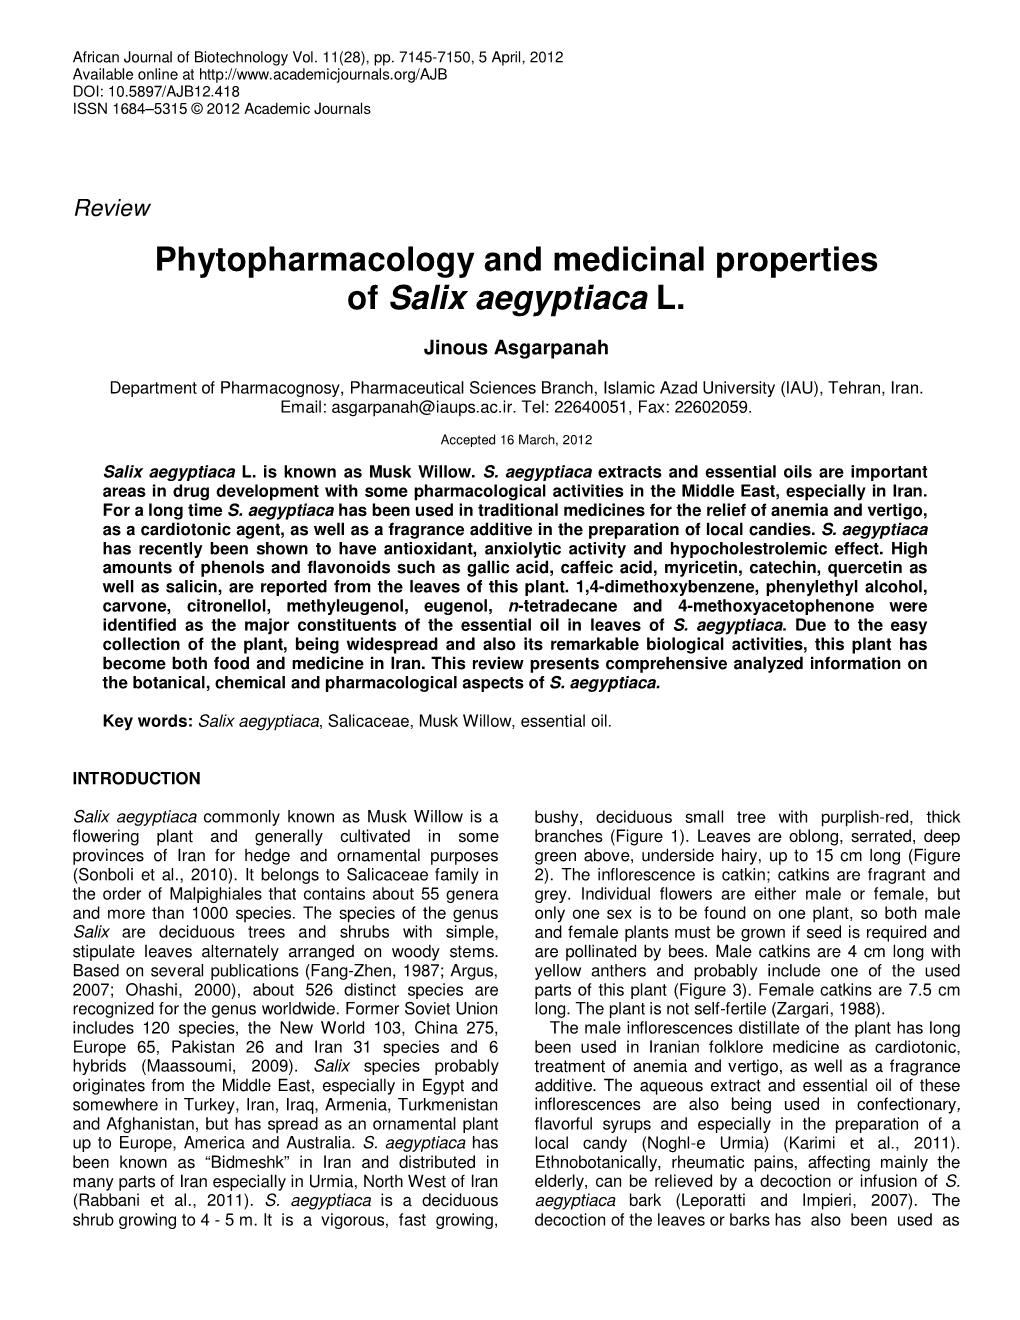 Phytopharmacology and Medicinal Properties of Salix Aegyptiaca L